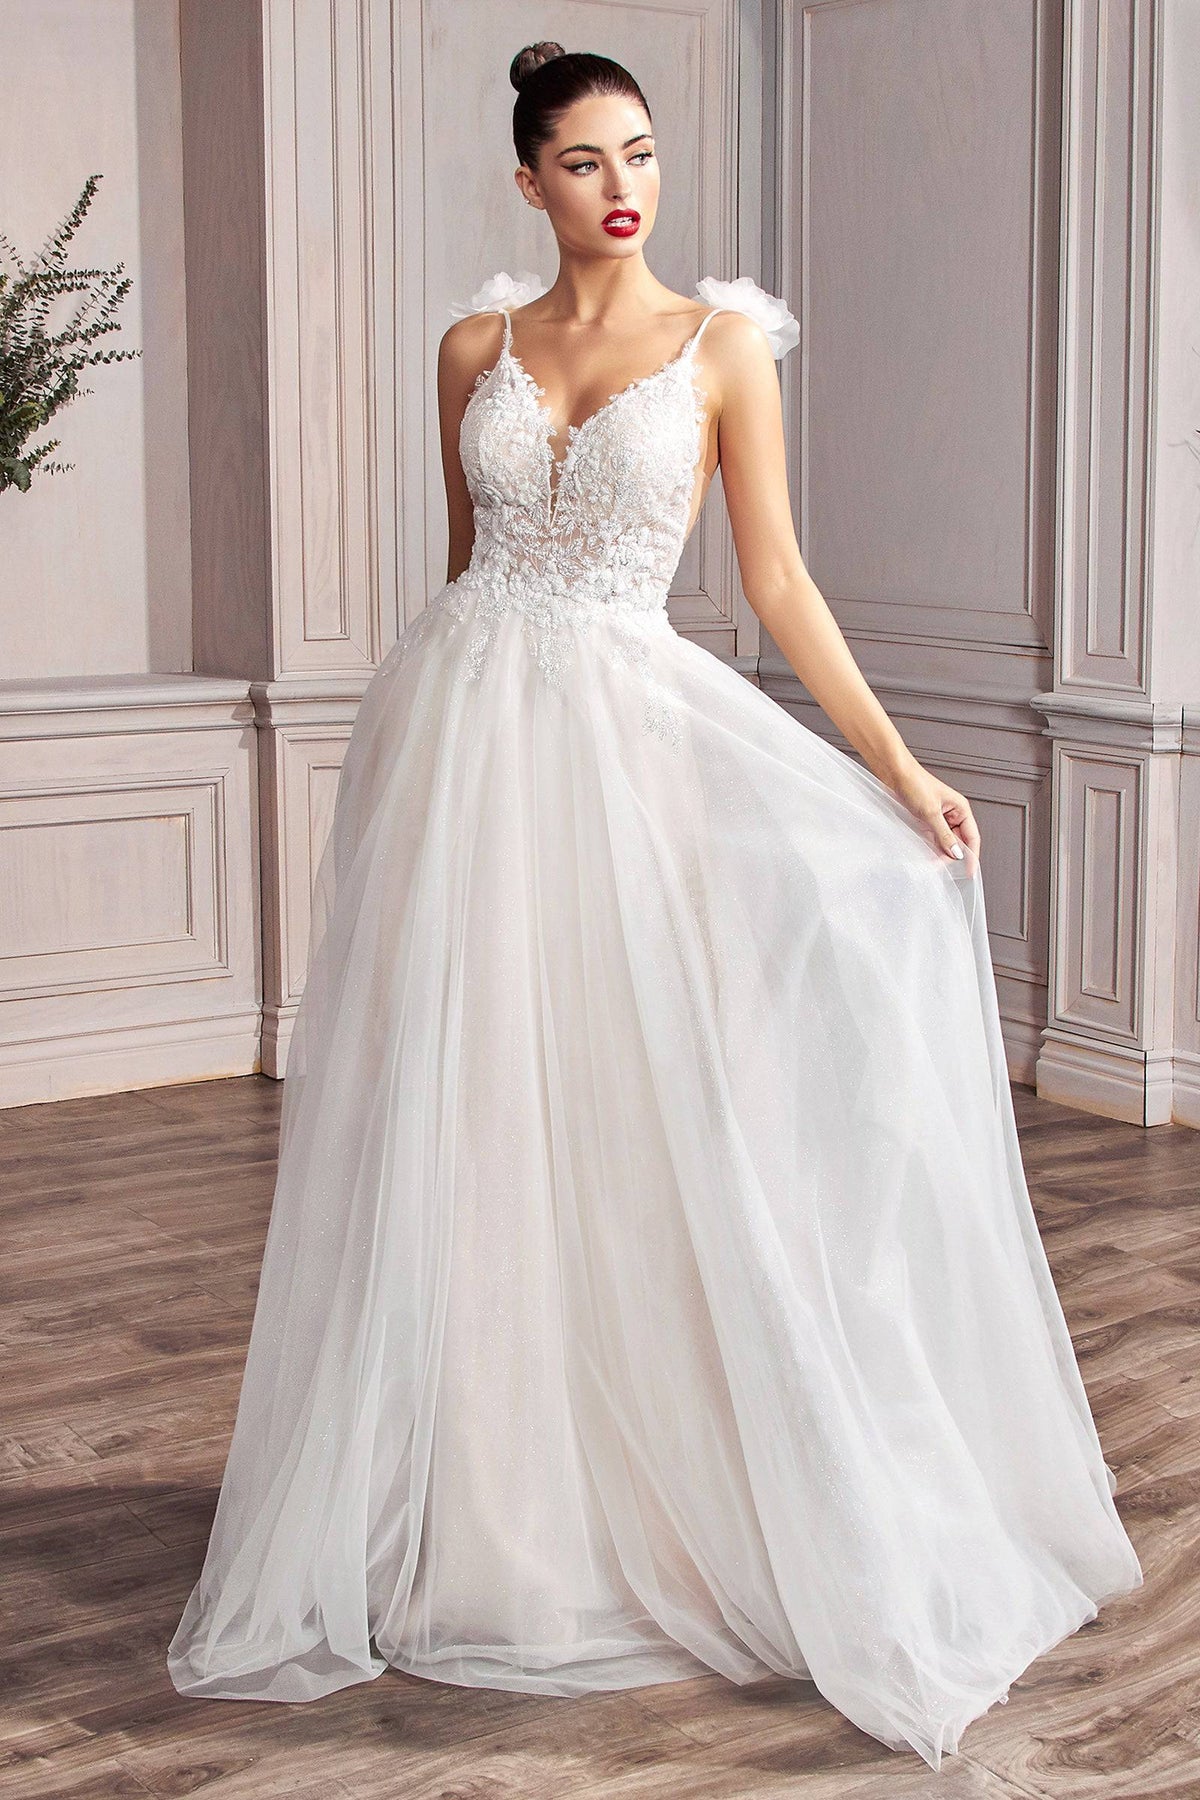 Elegant Floral Long Gown with Flower Accents on Sleeves and Embroidered Bodice #CDCD215W - NORMA REED